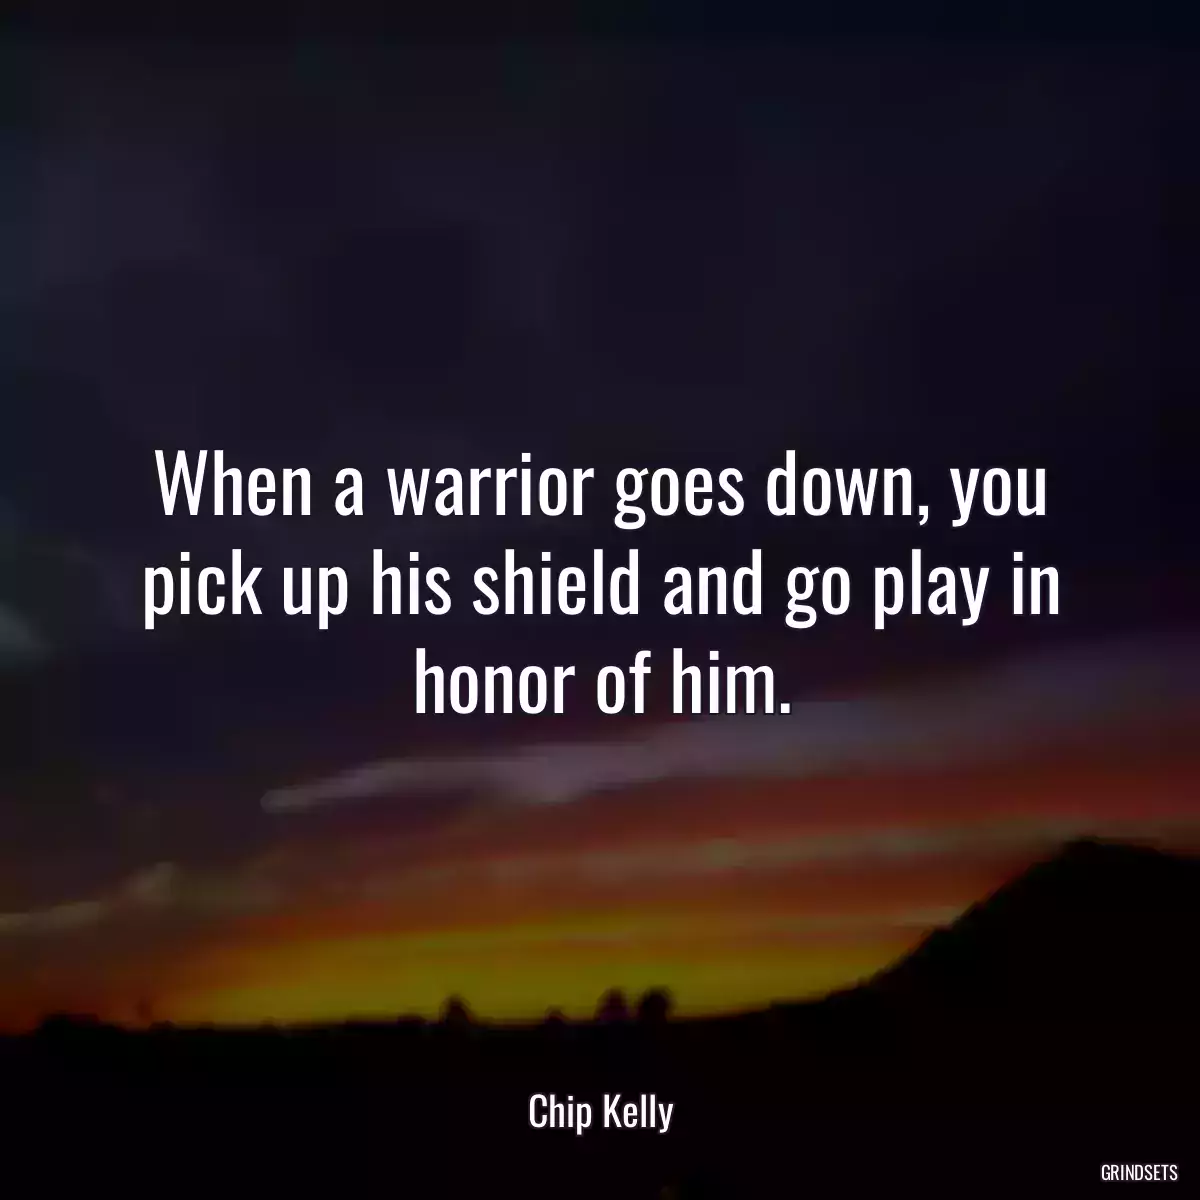 When a warrior goes down, you pick up his shield and go play in honor of him.